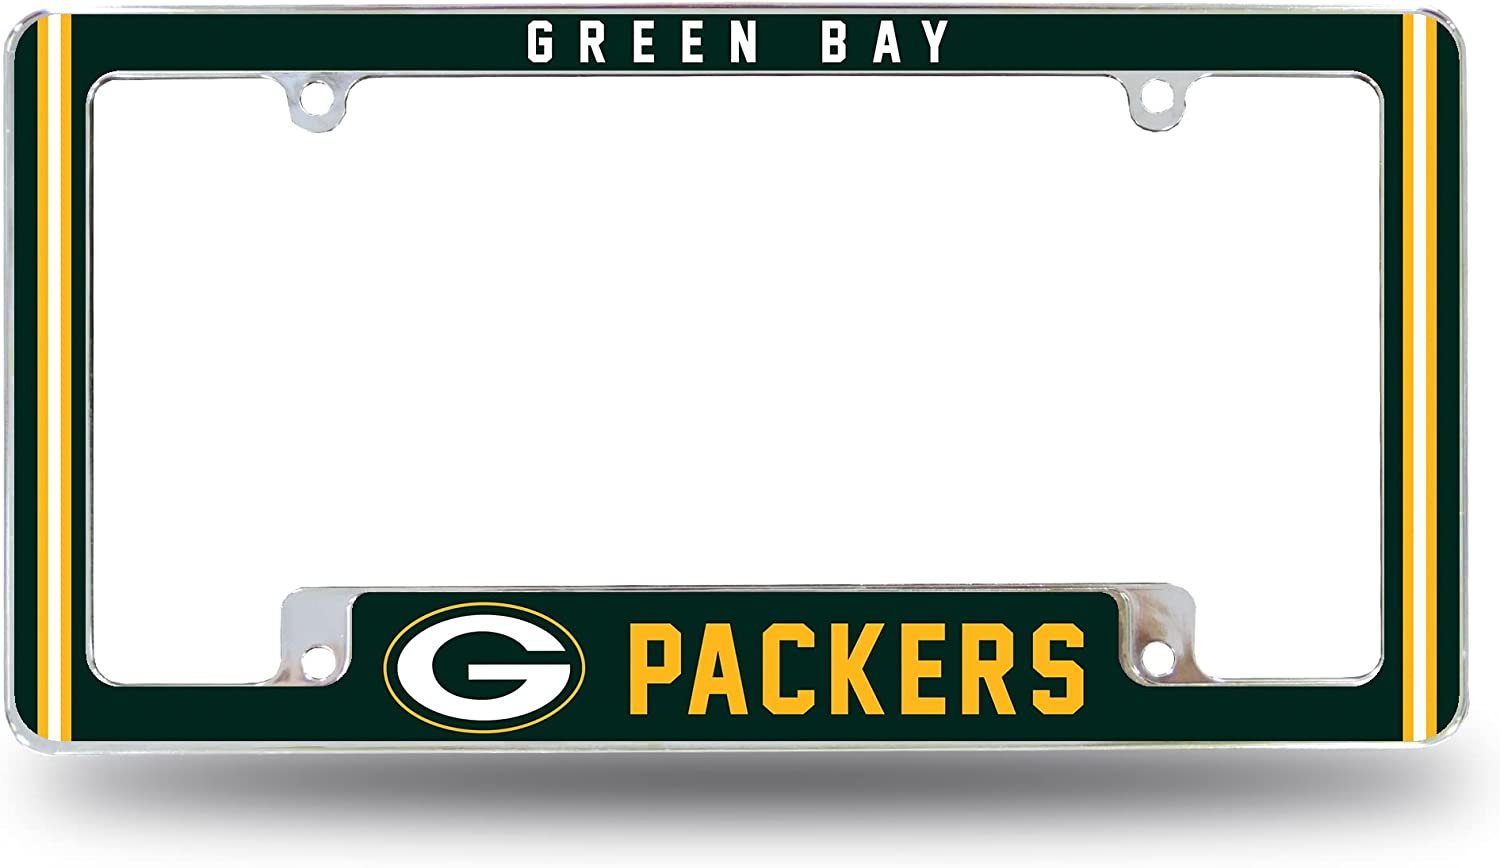 Green Bay Packers Metal License Plate Frame Chrome Tag Cover Alternate Design 6x12 Inch